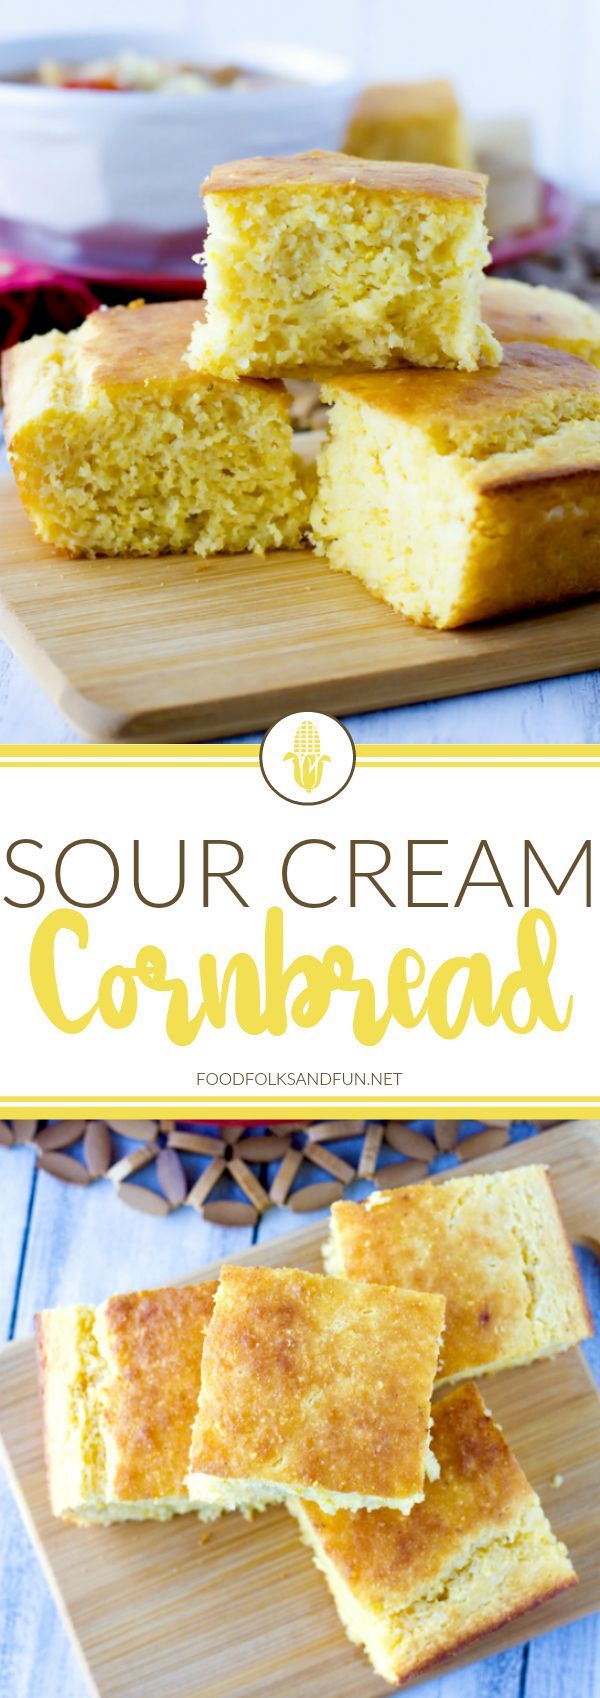 This Sour Cream Cornbread recipe is so moist, delicious, and not overly sweet. It’s super easy to make, the entire family will love it, and it's simply the best! -   21 corn bread recipes
 ideas